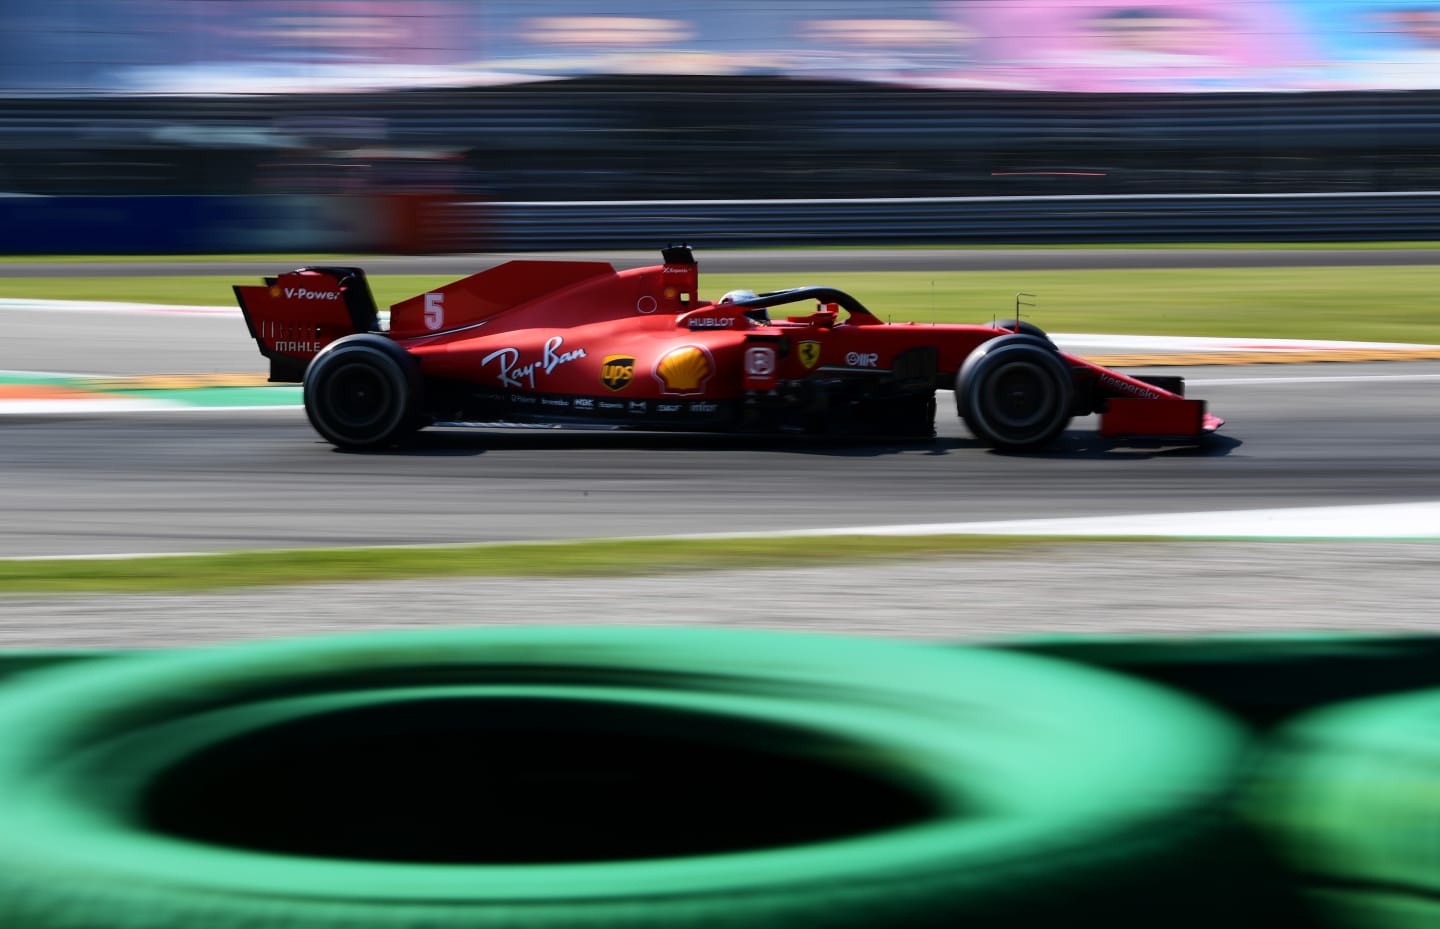 MONZA, ITALY - SEPTEMBER 04: Sebastian Vettel of Germany driving the (5) Scuderia Ferrari SF1000 on track during practice for the F1 Grand Prix of Italy at Autodromo di Monza on September 04, 2020 in Monza, Italy. (Photo by Miguel Medina/Pool via Getty Images)